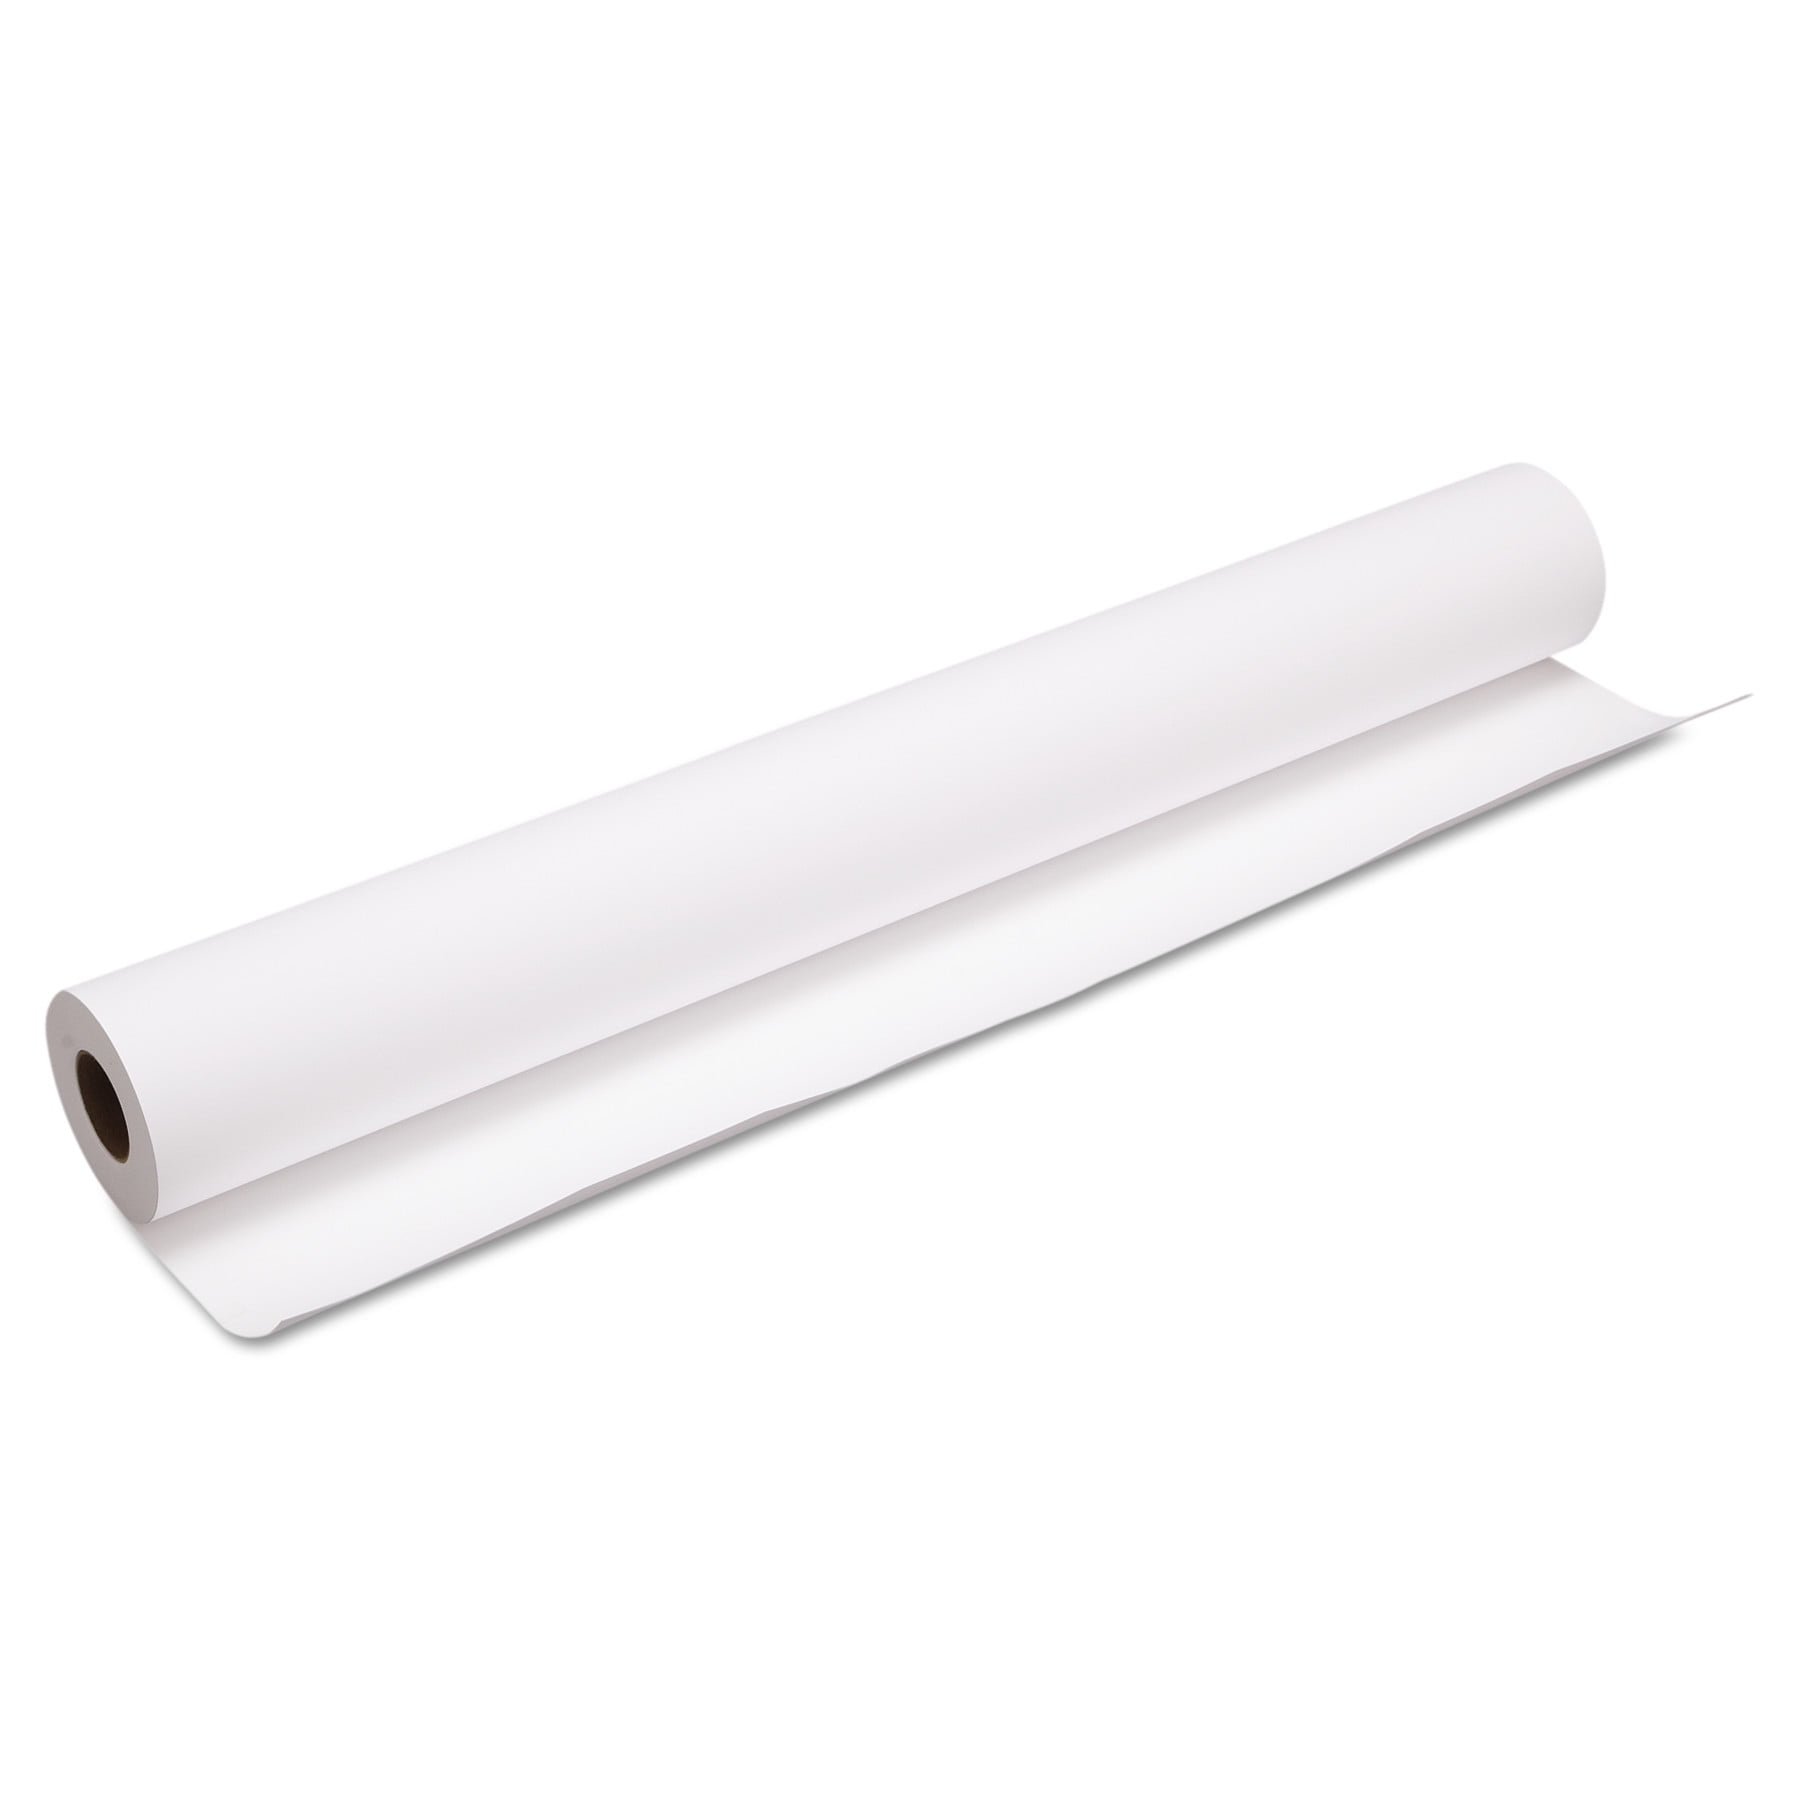 Canon - bond paper - 1 roll(s) - Roll (36 in x 300 ft) - 75 g/m² - 3871V288  - Paper & Labels 